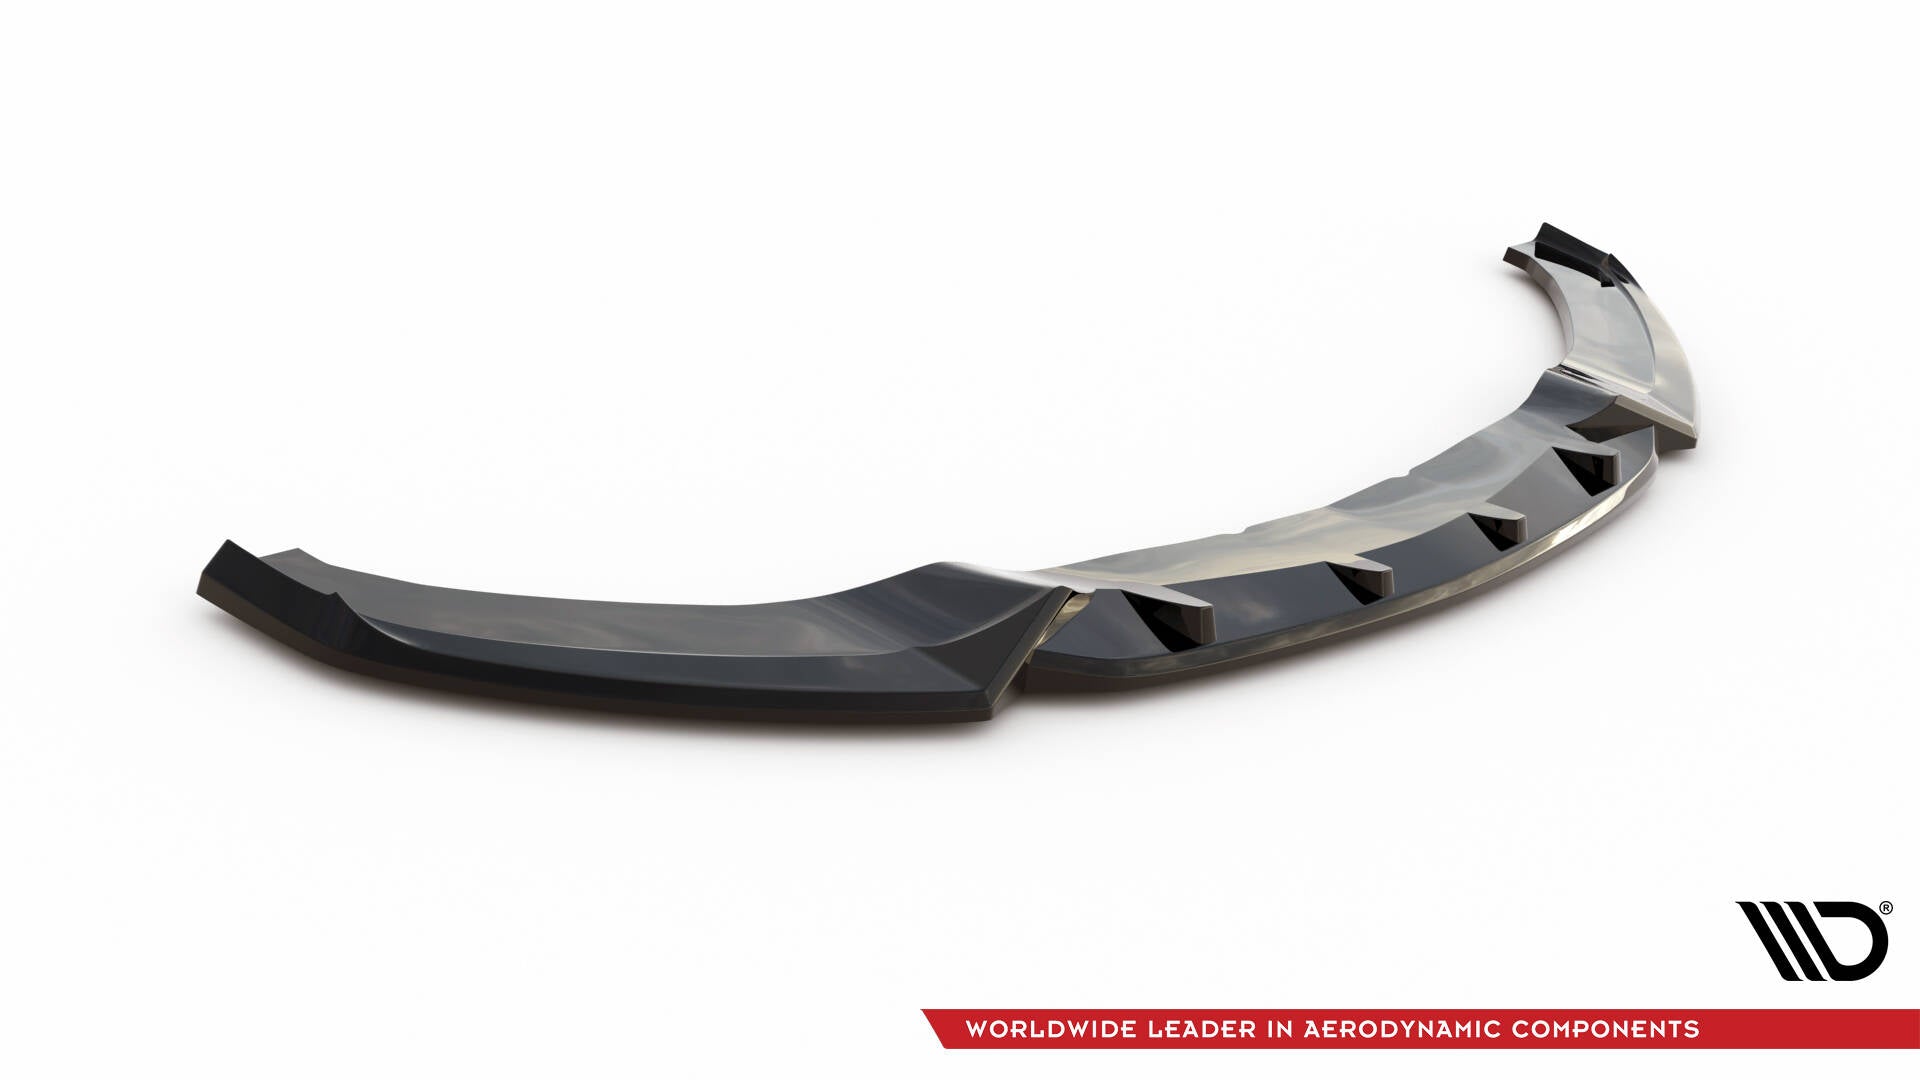 Front Splitter V.3 BMW 4 Coupe / Gran Coupe / Cabrio M-Pack F32 / F36 / F33